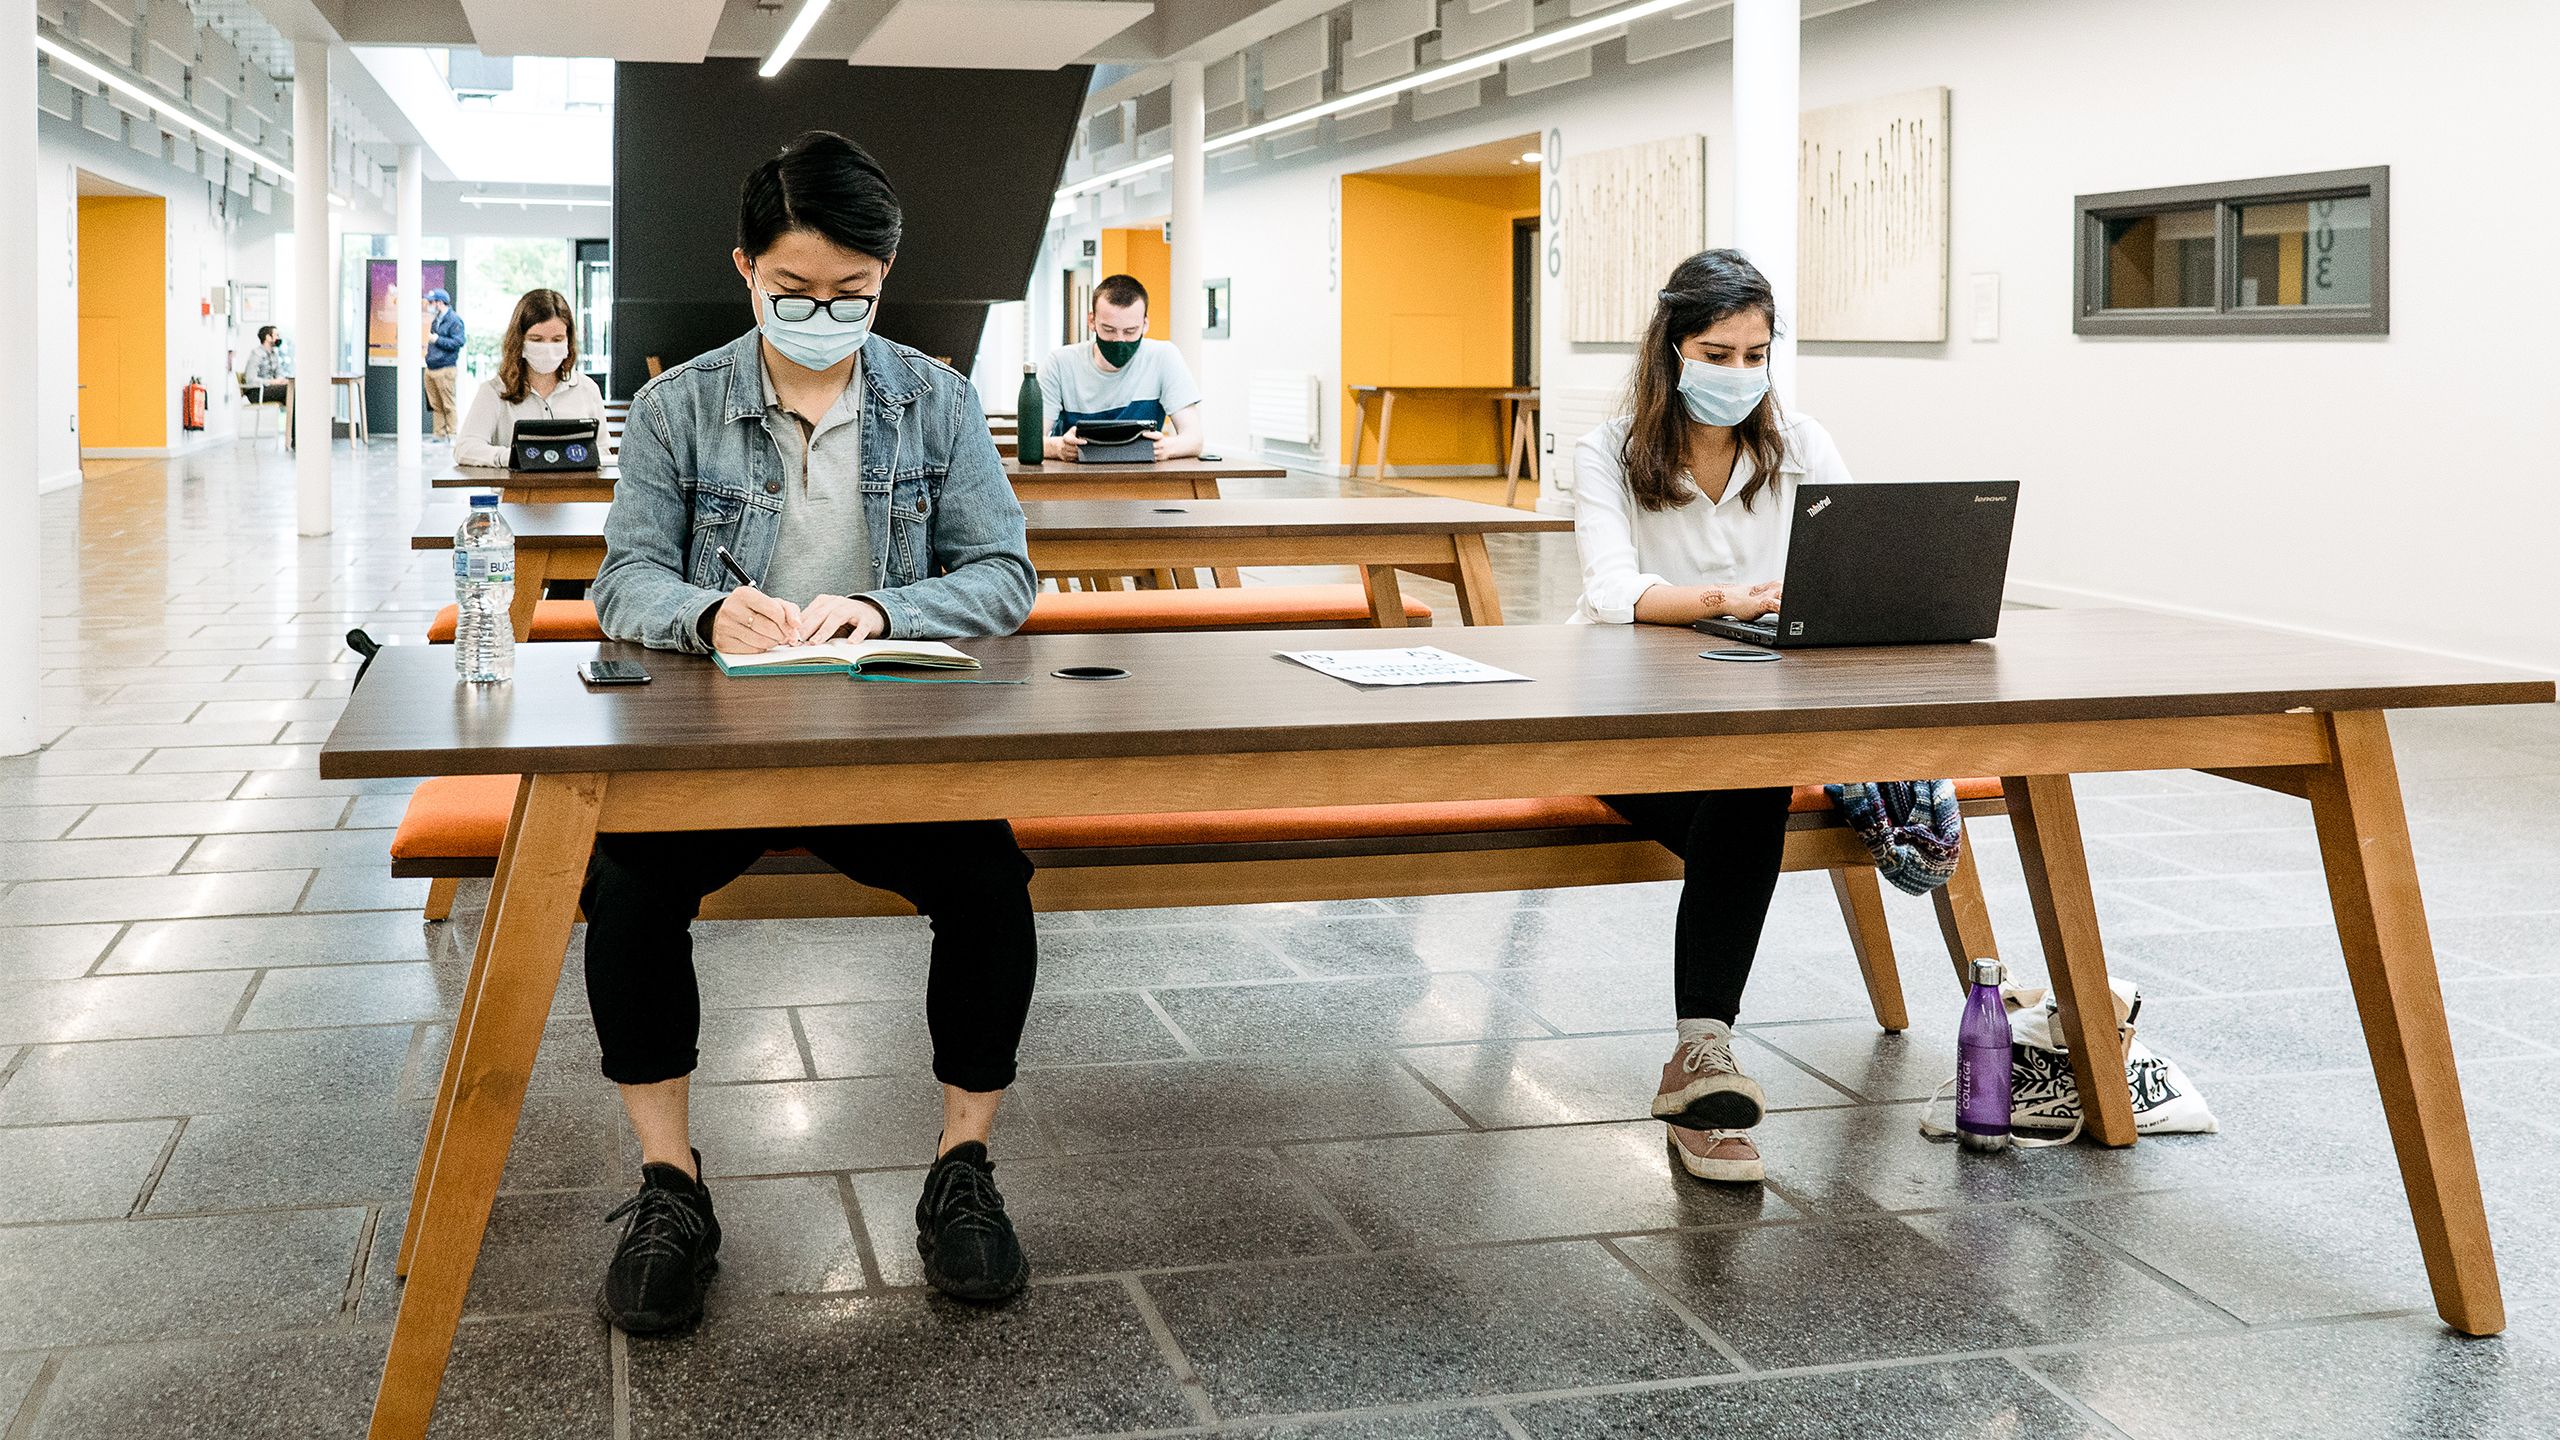 A group of students wearing face coverings and socially distancing while they study